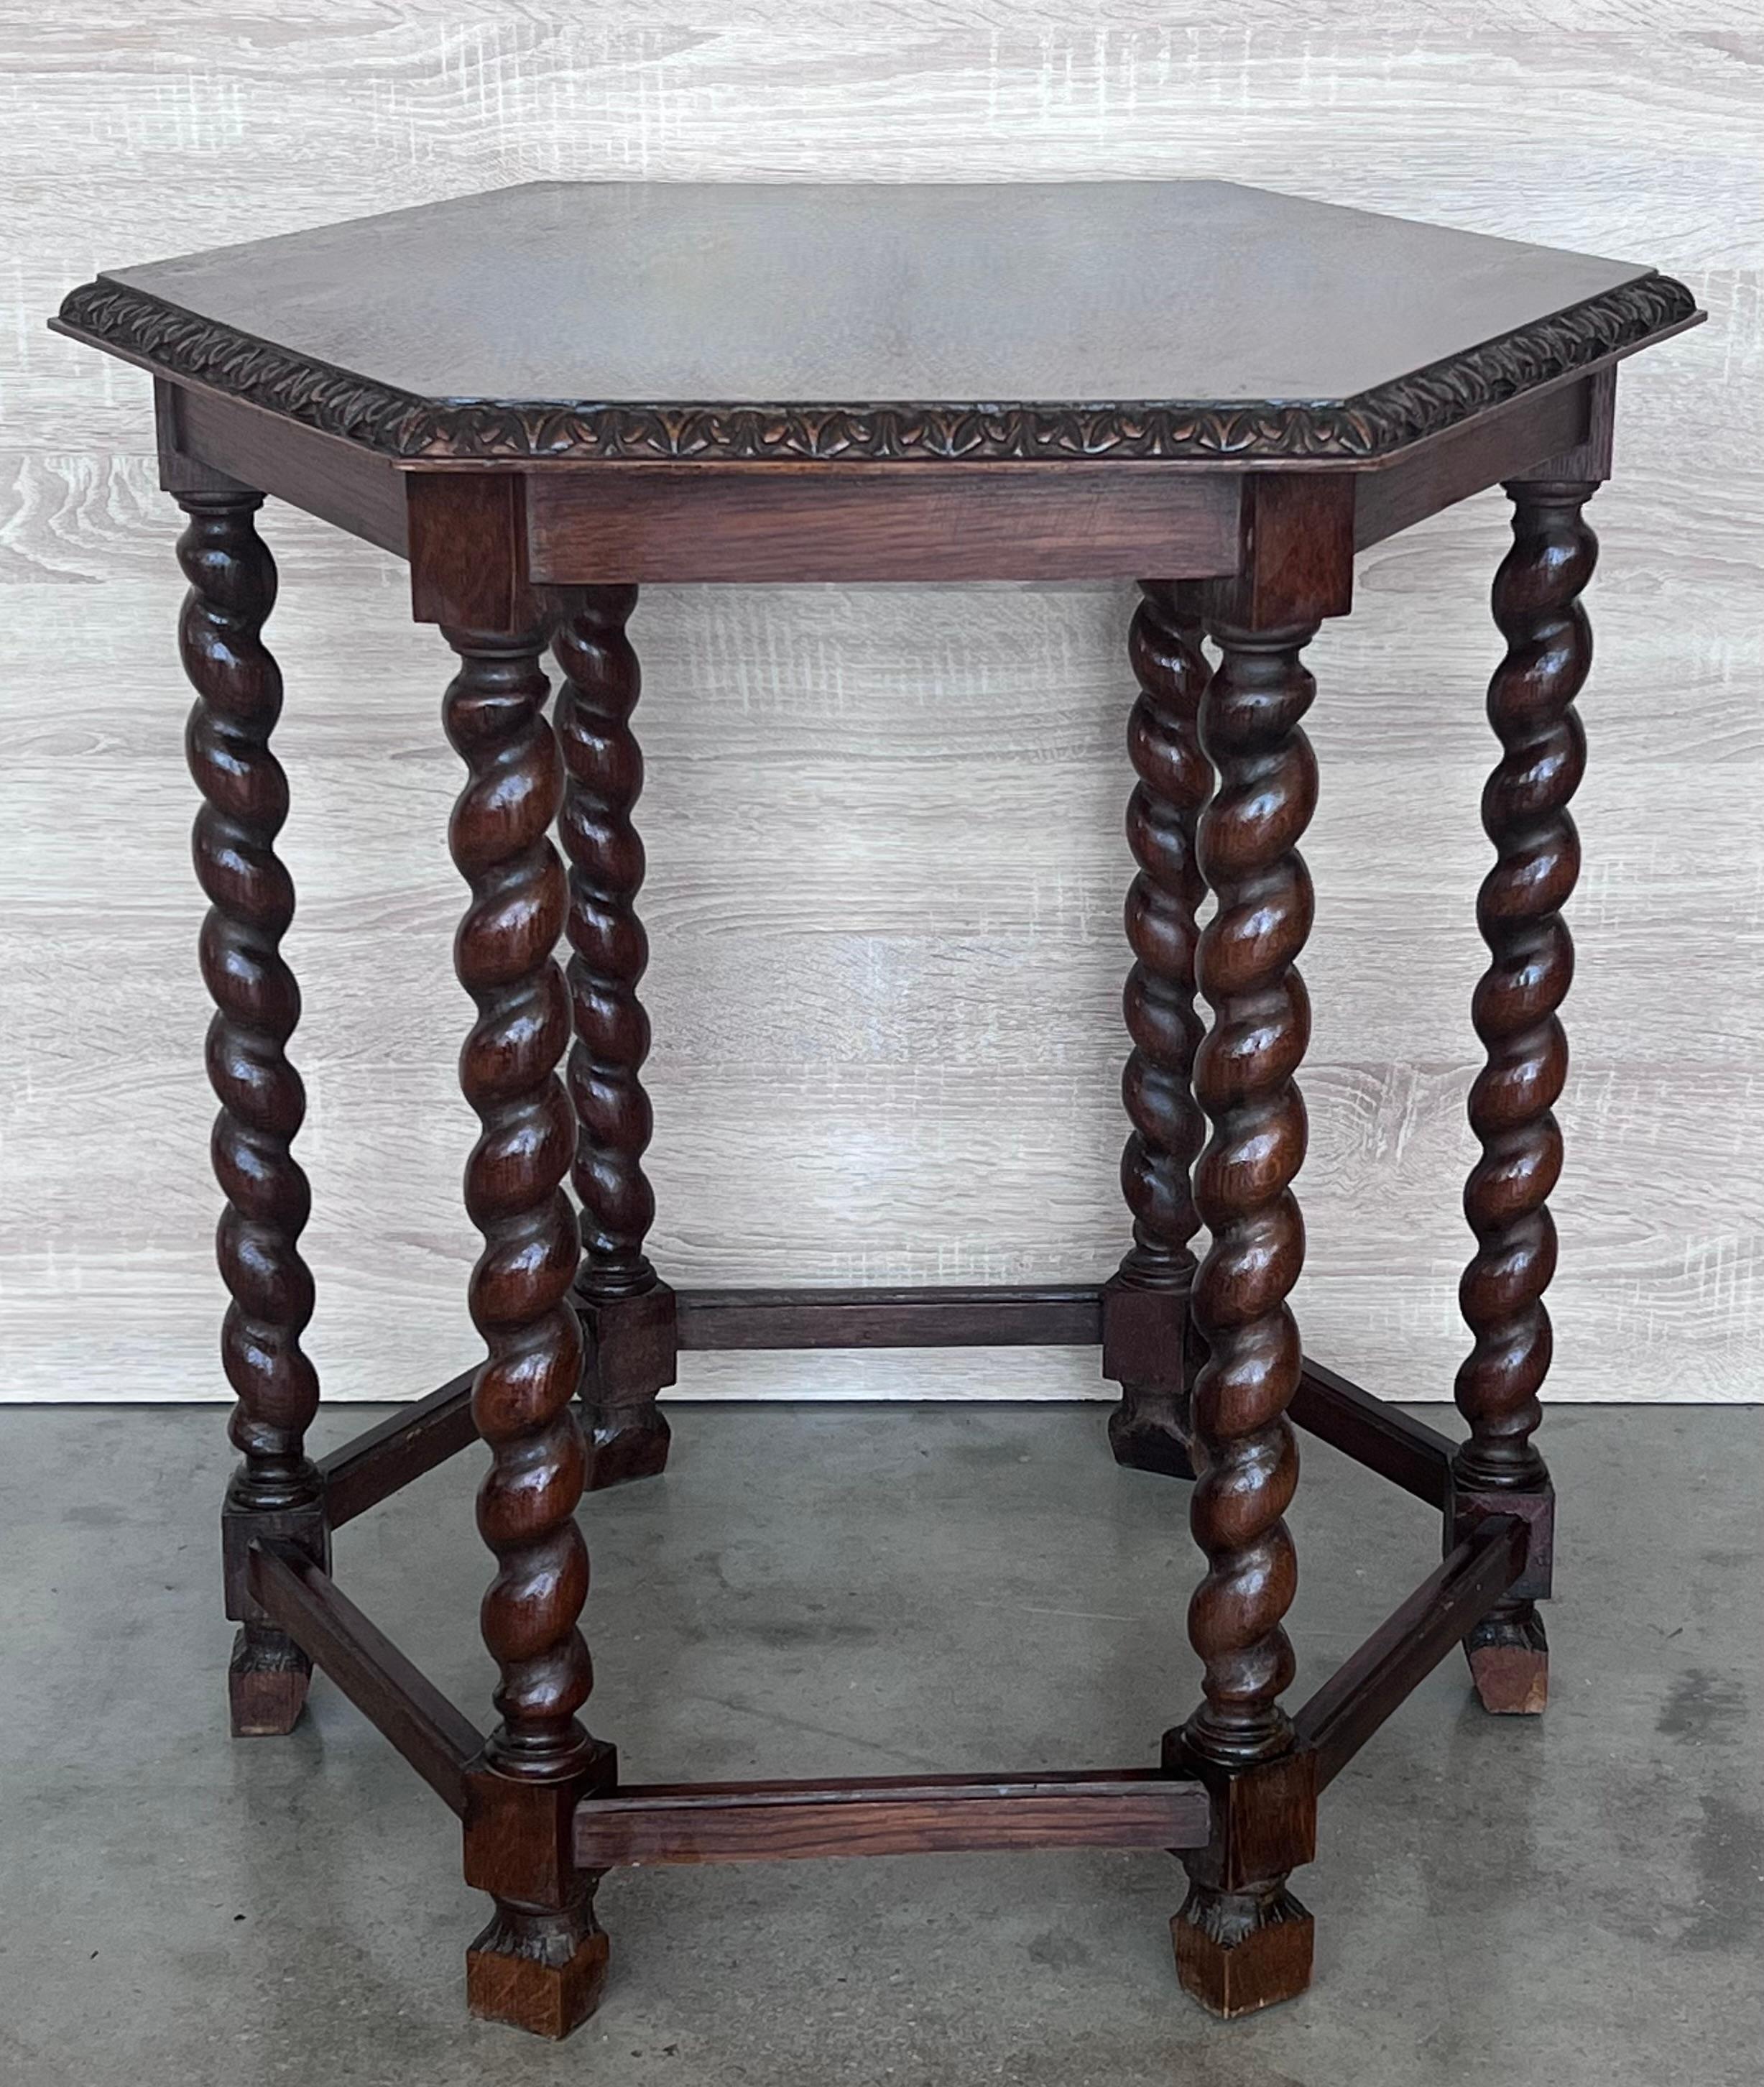 Hexagonall side table with Solomonic legs and carved top and carved edges. The table has six legs with stretcher between the legs to reinforce the stability .
Restored and very functional piece.